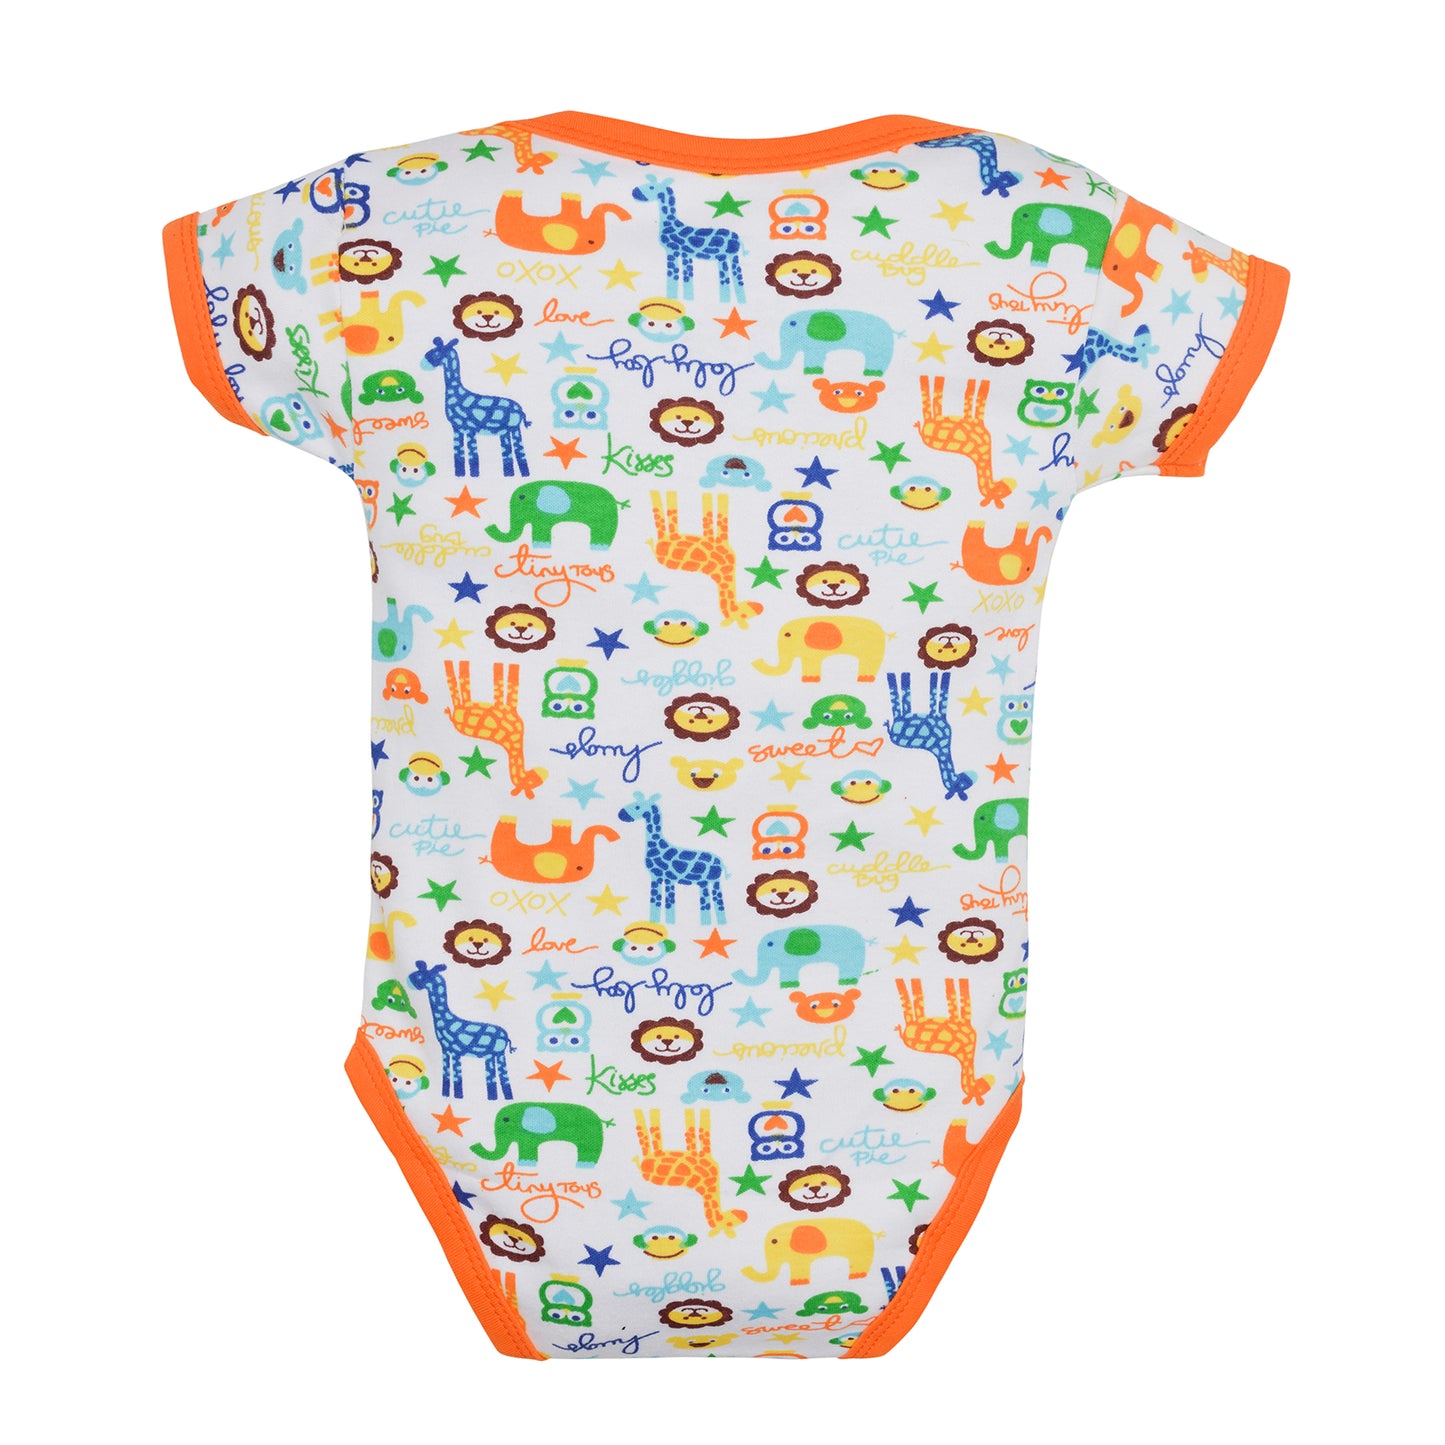 Bodice Half Sleeves Baby Romper Body Suits Jump Suit for Boys and Girls Set of 3 (Orange)